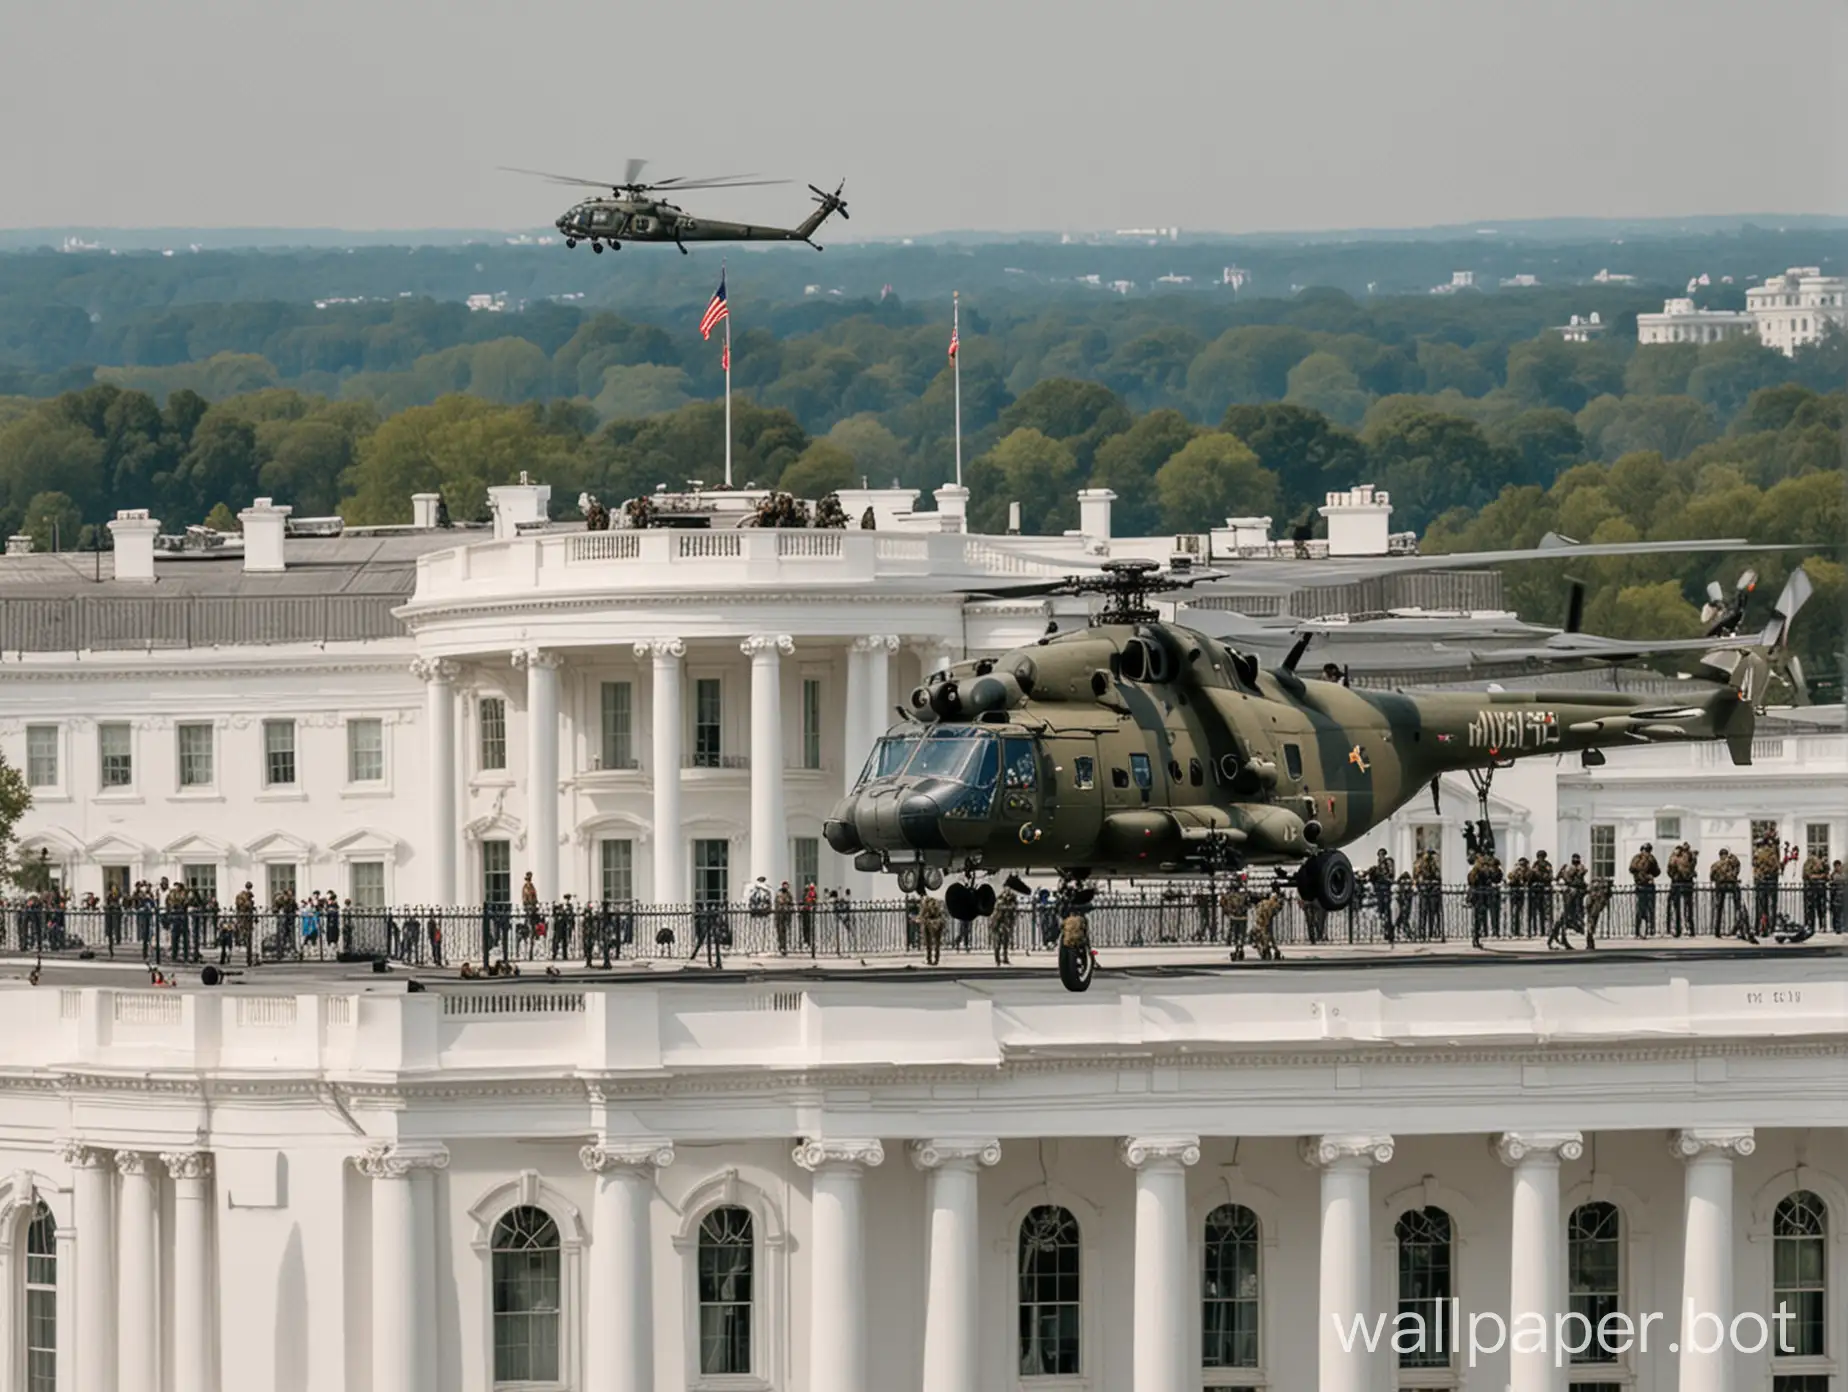 MI8-Helicopter-Deploying-Soldiers-on-the-White-House-Roof-in-Washington-on-a-Clear-Day